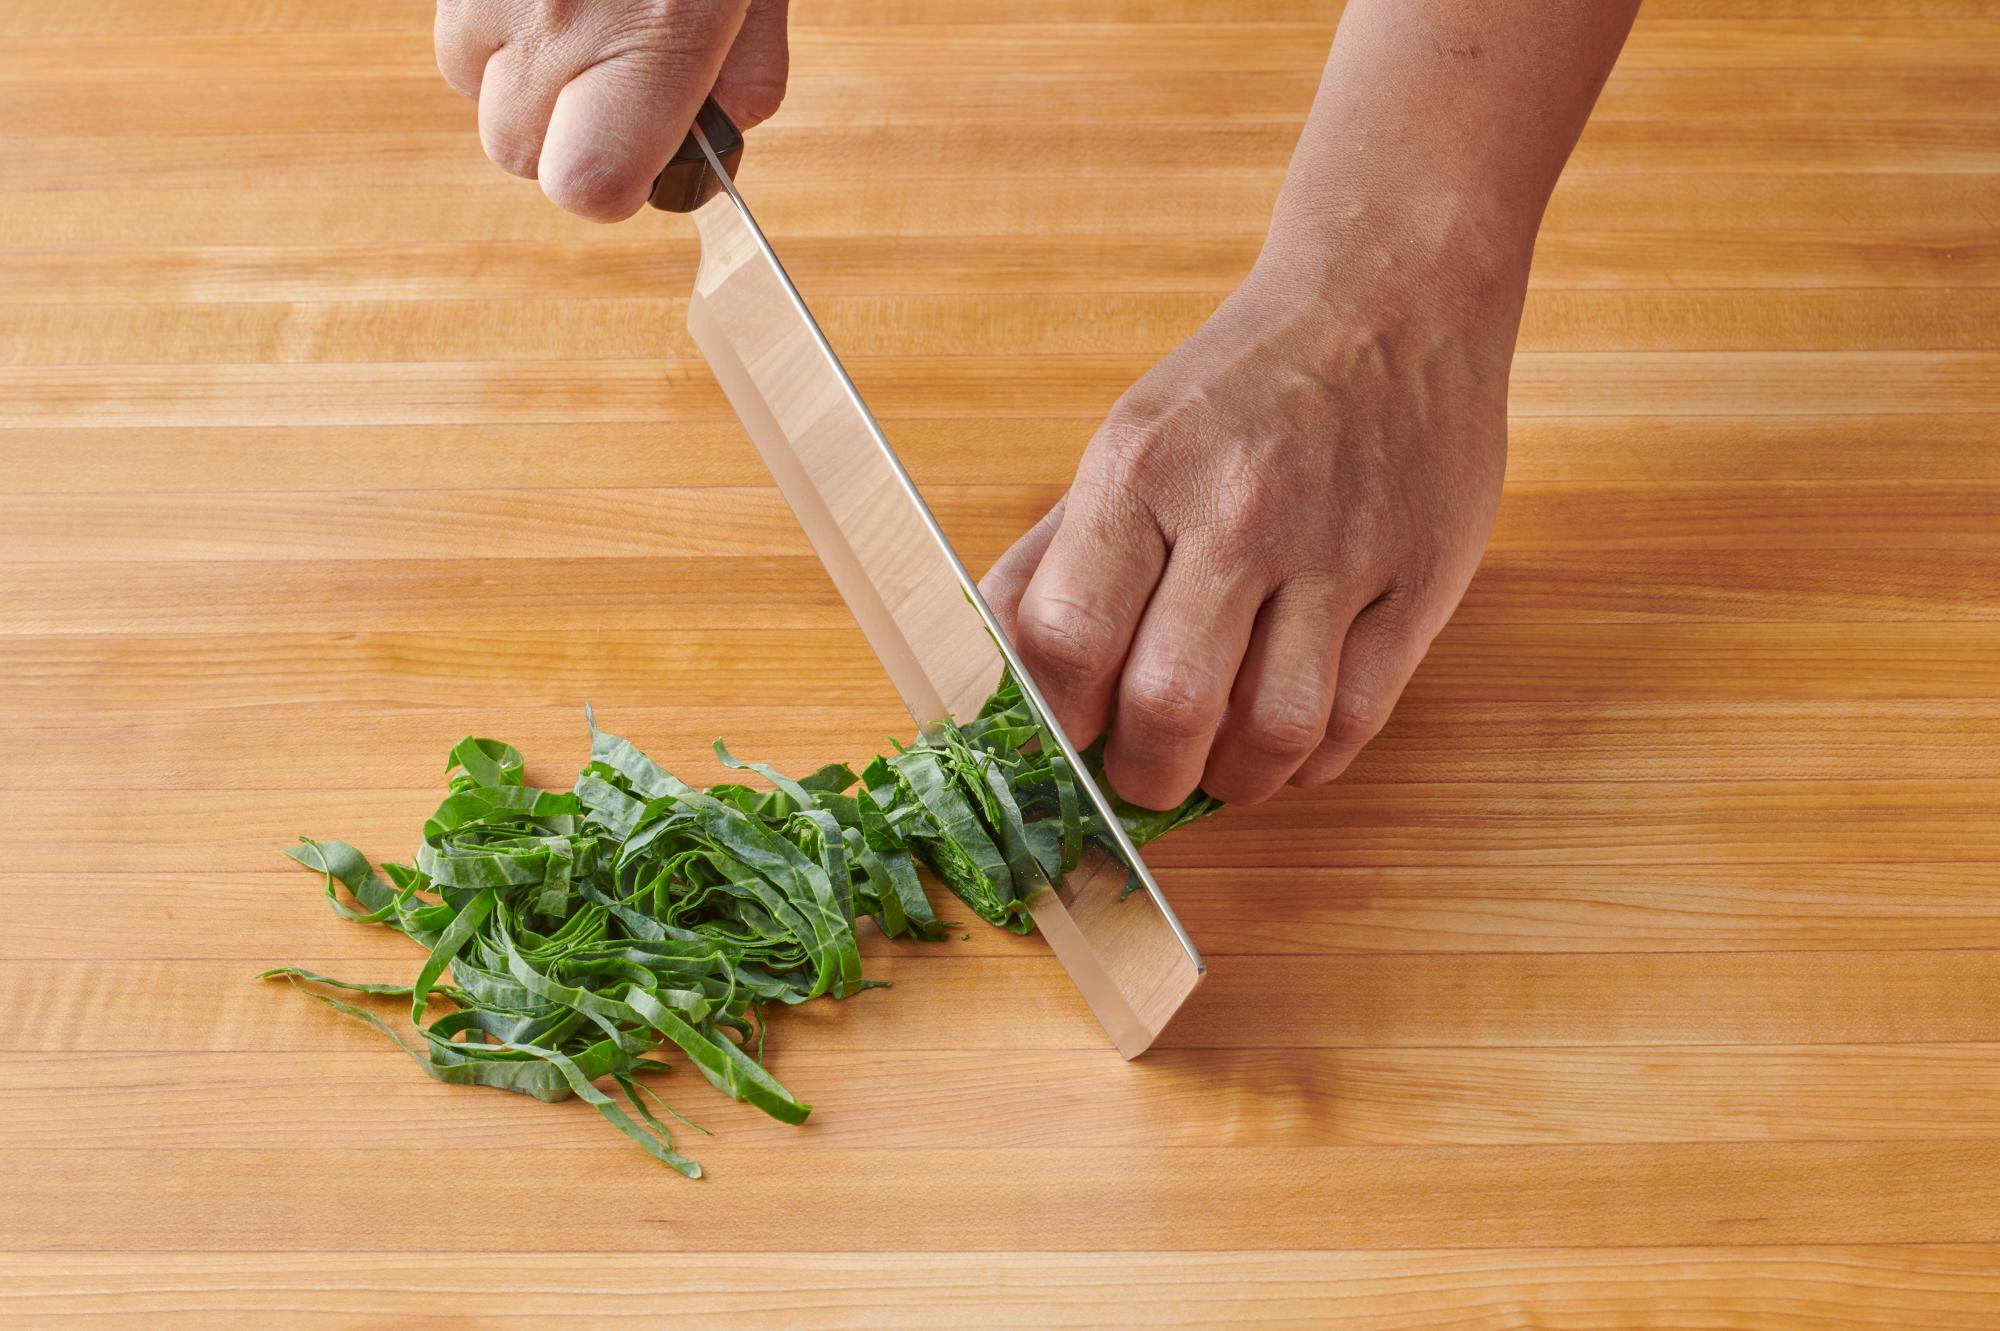 Slicing the collard greens with a Vegetable Knife.